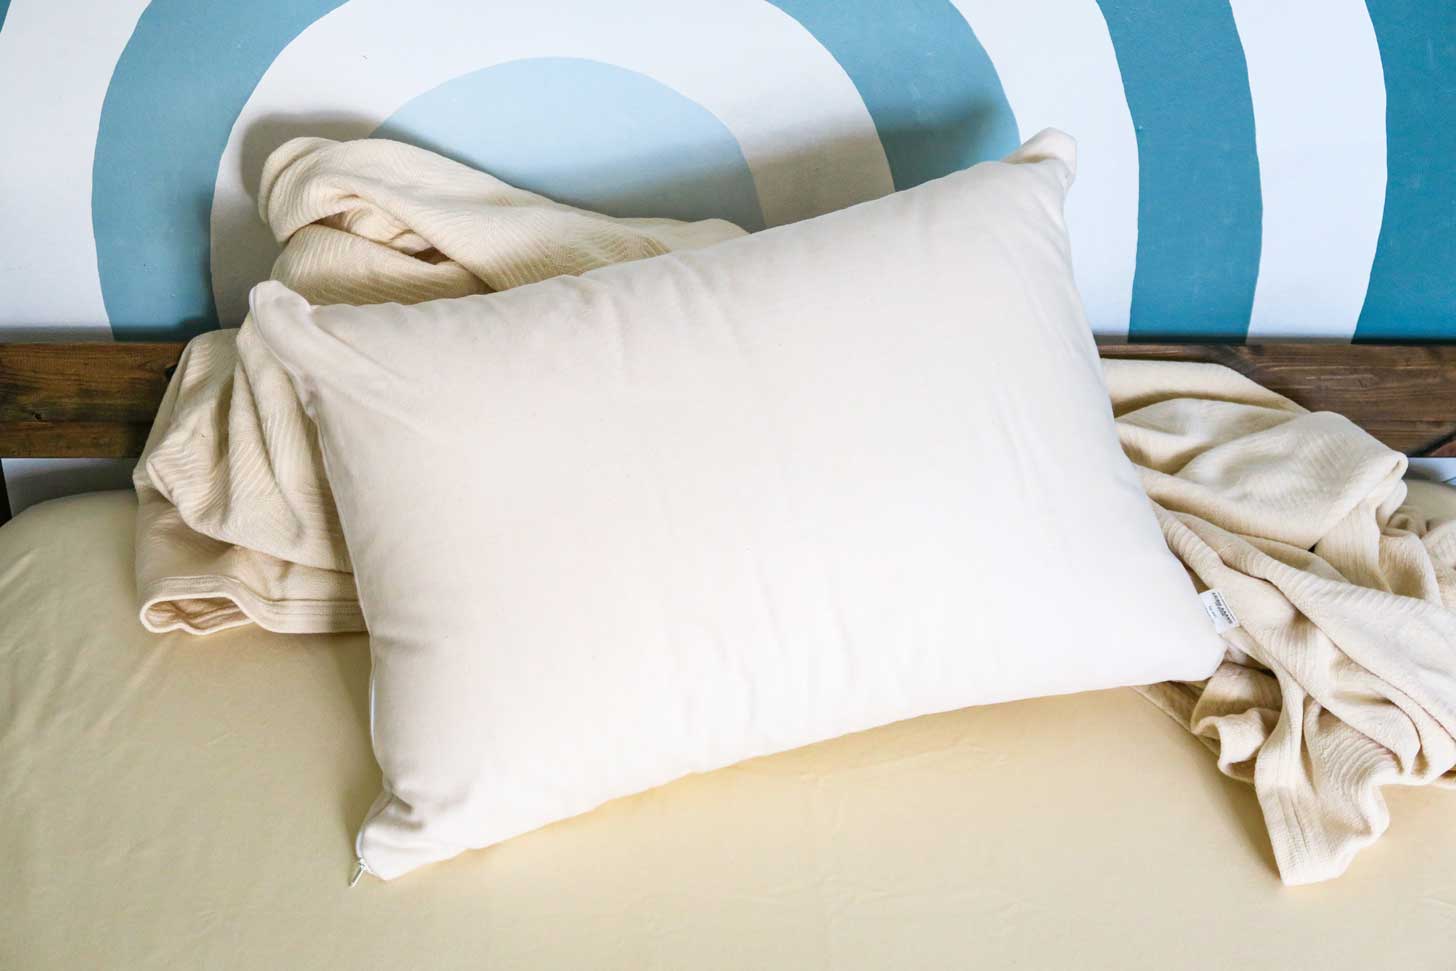 A Kappok pillow on a bed next to blankets